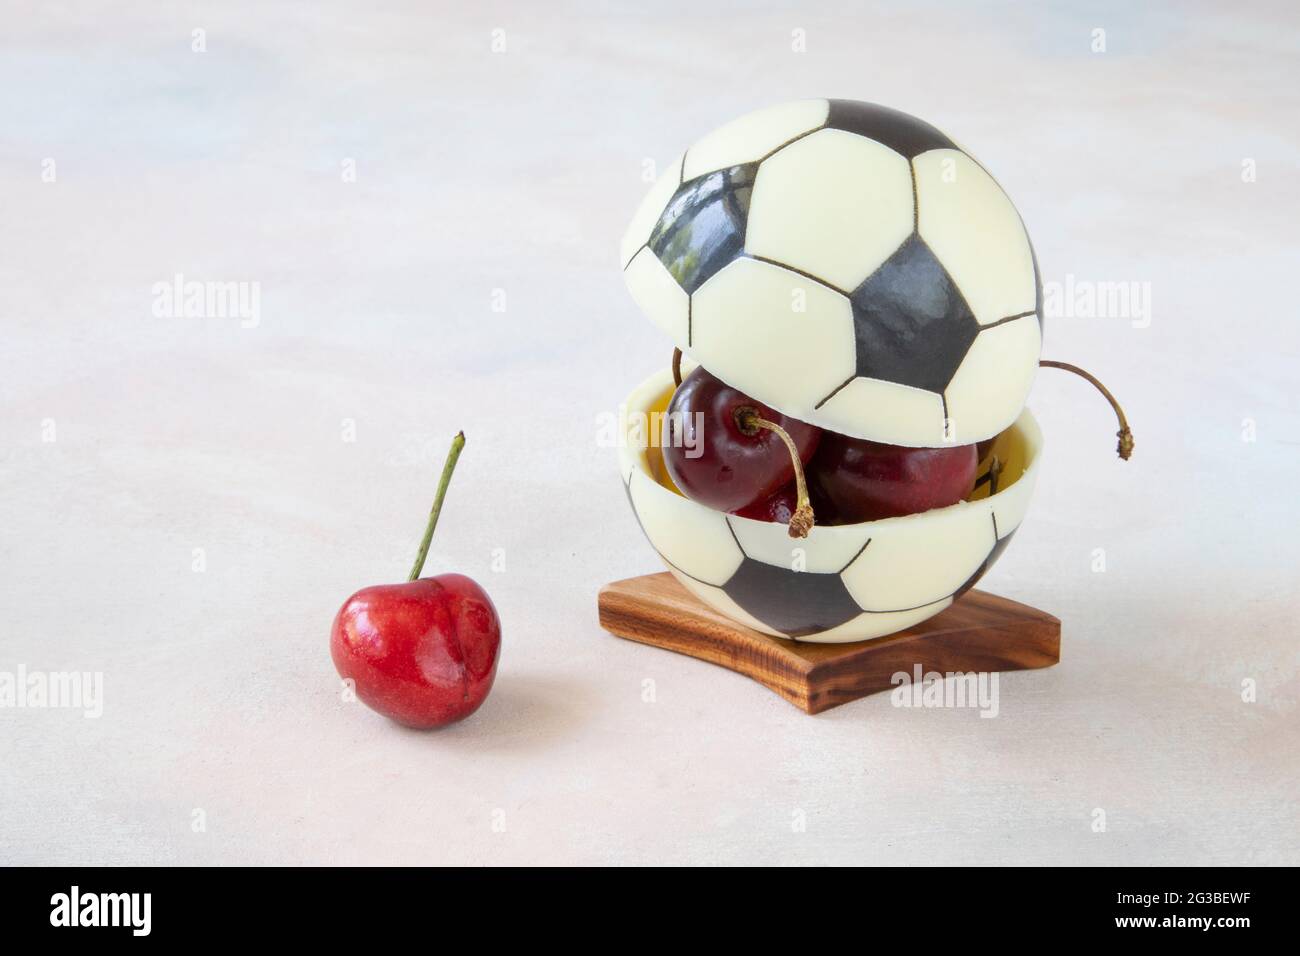 Chocolate ball for European football with cherry berries inside. Modern dessert concept for healthy watching of football matches with a delicious snac Stock Photo